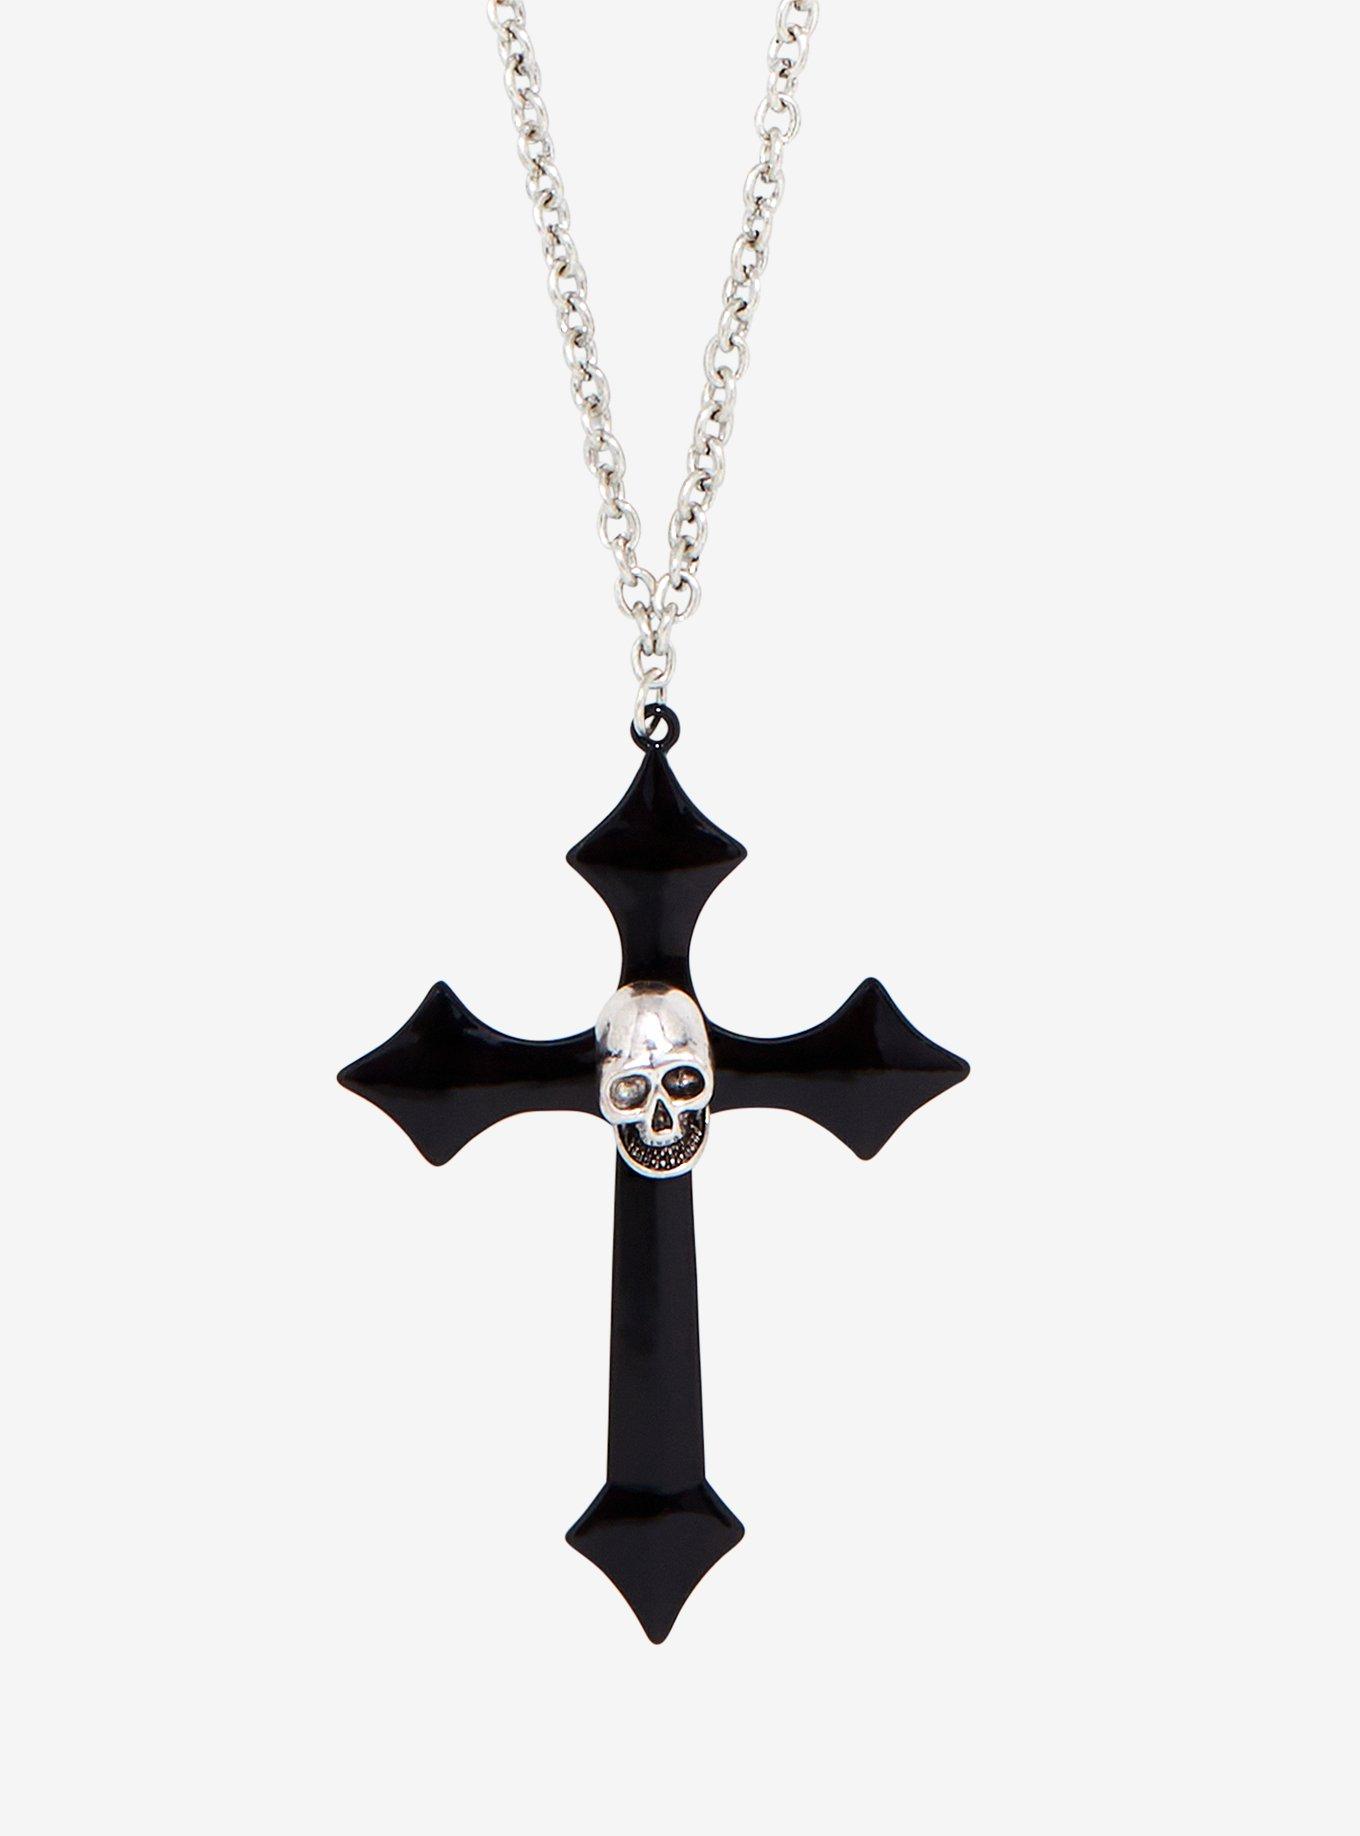 Skull Charm on Chain Emo/Goth Necklace